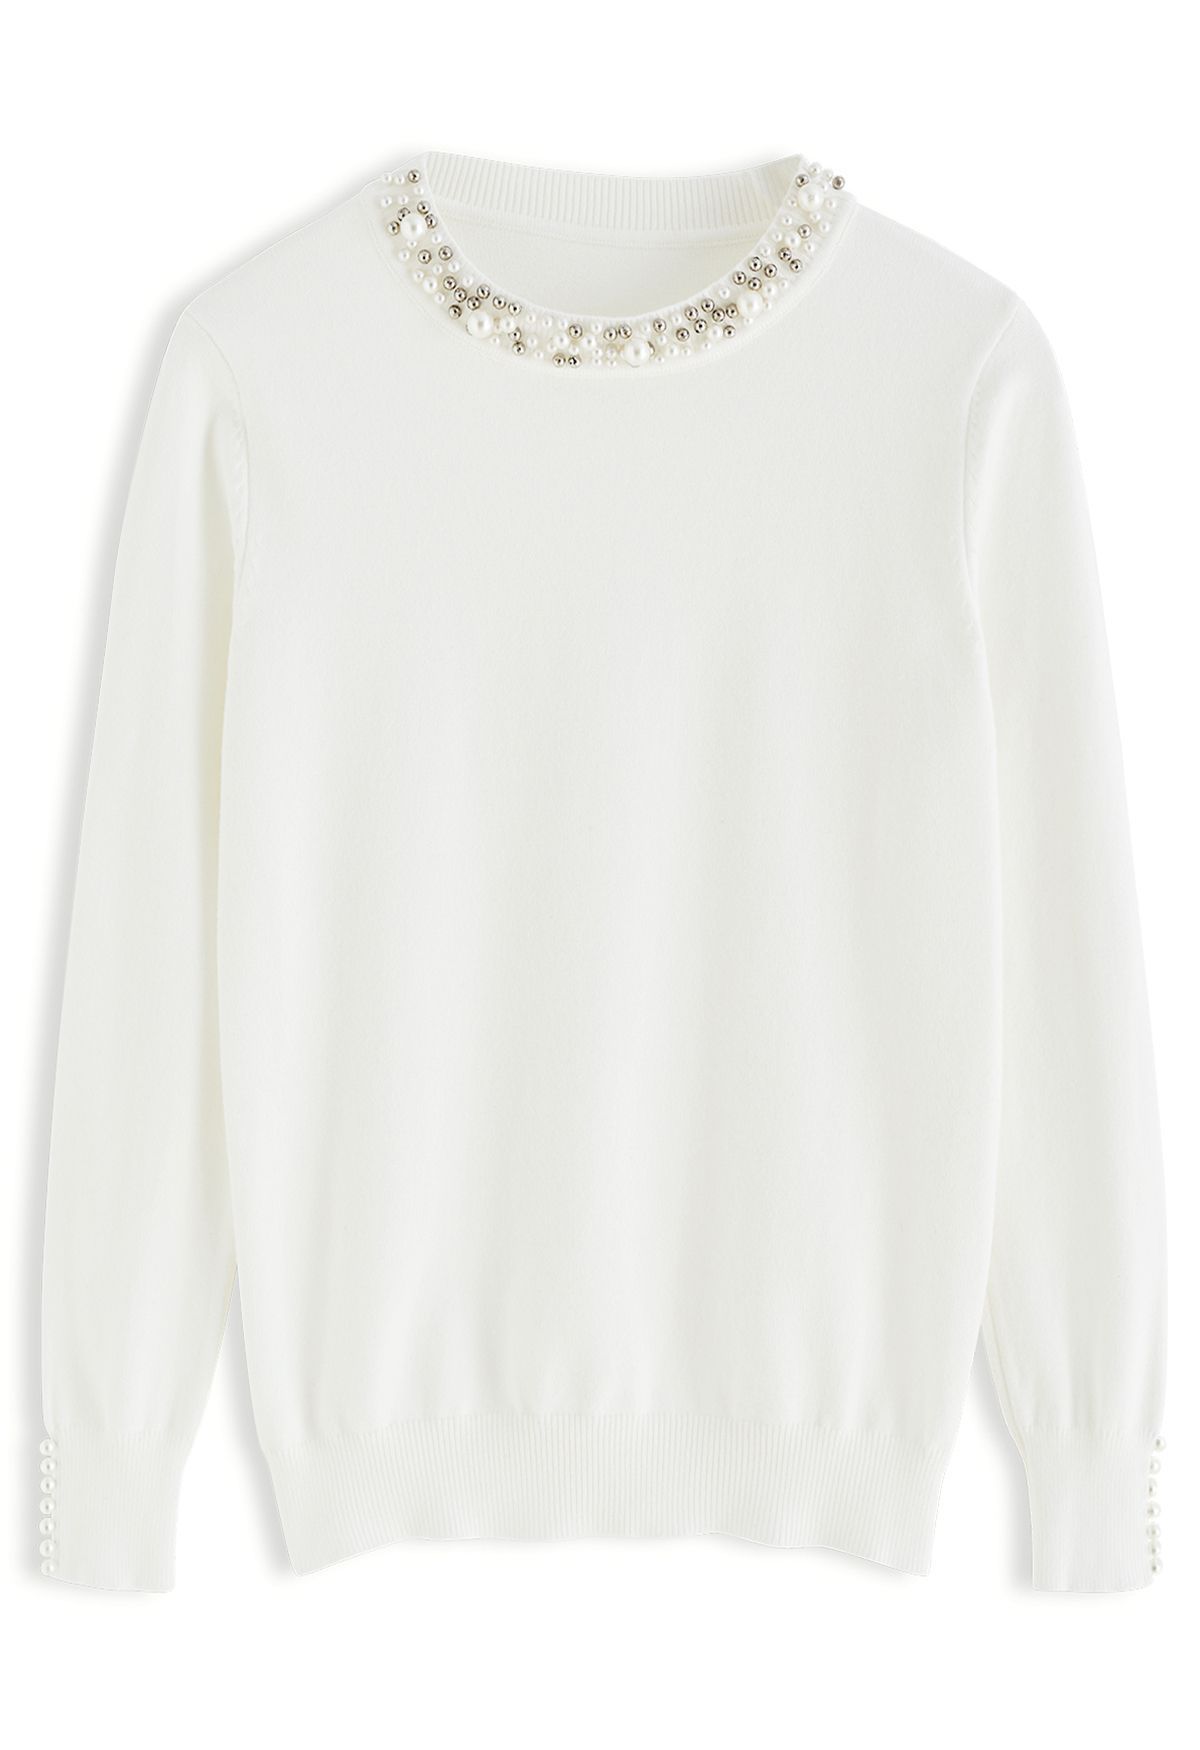 Pearl Trimmed Soft Knit Top in White | Chicwish